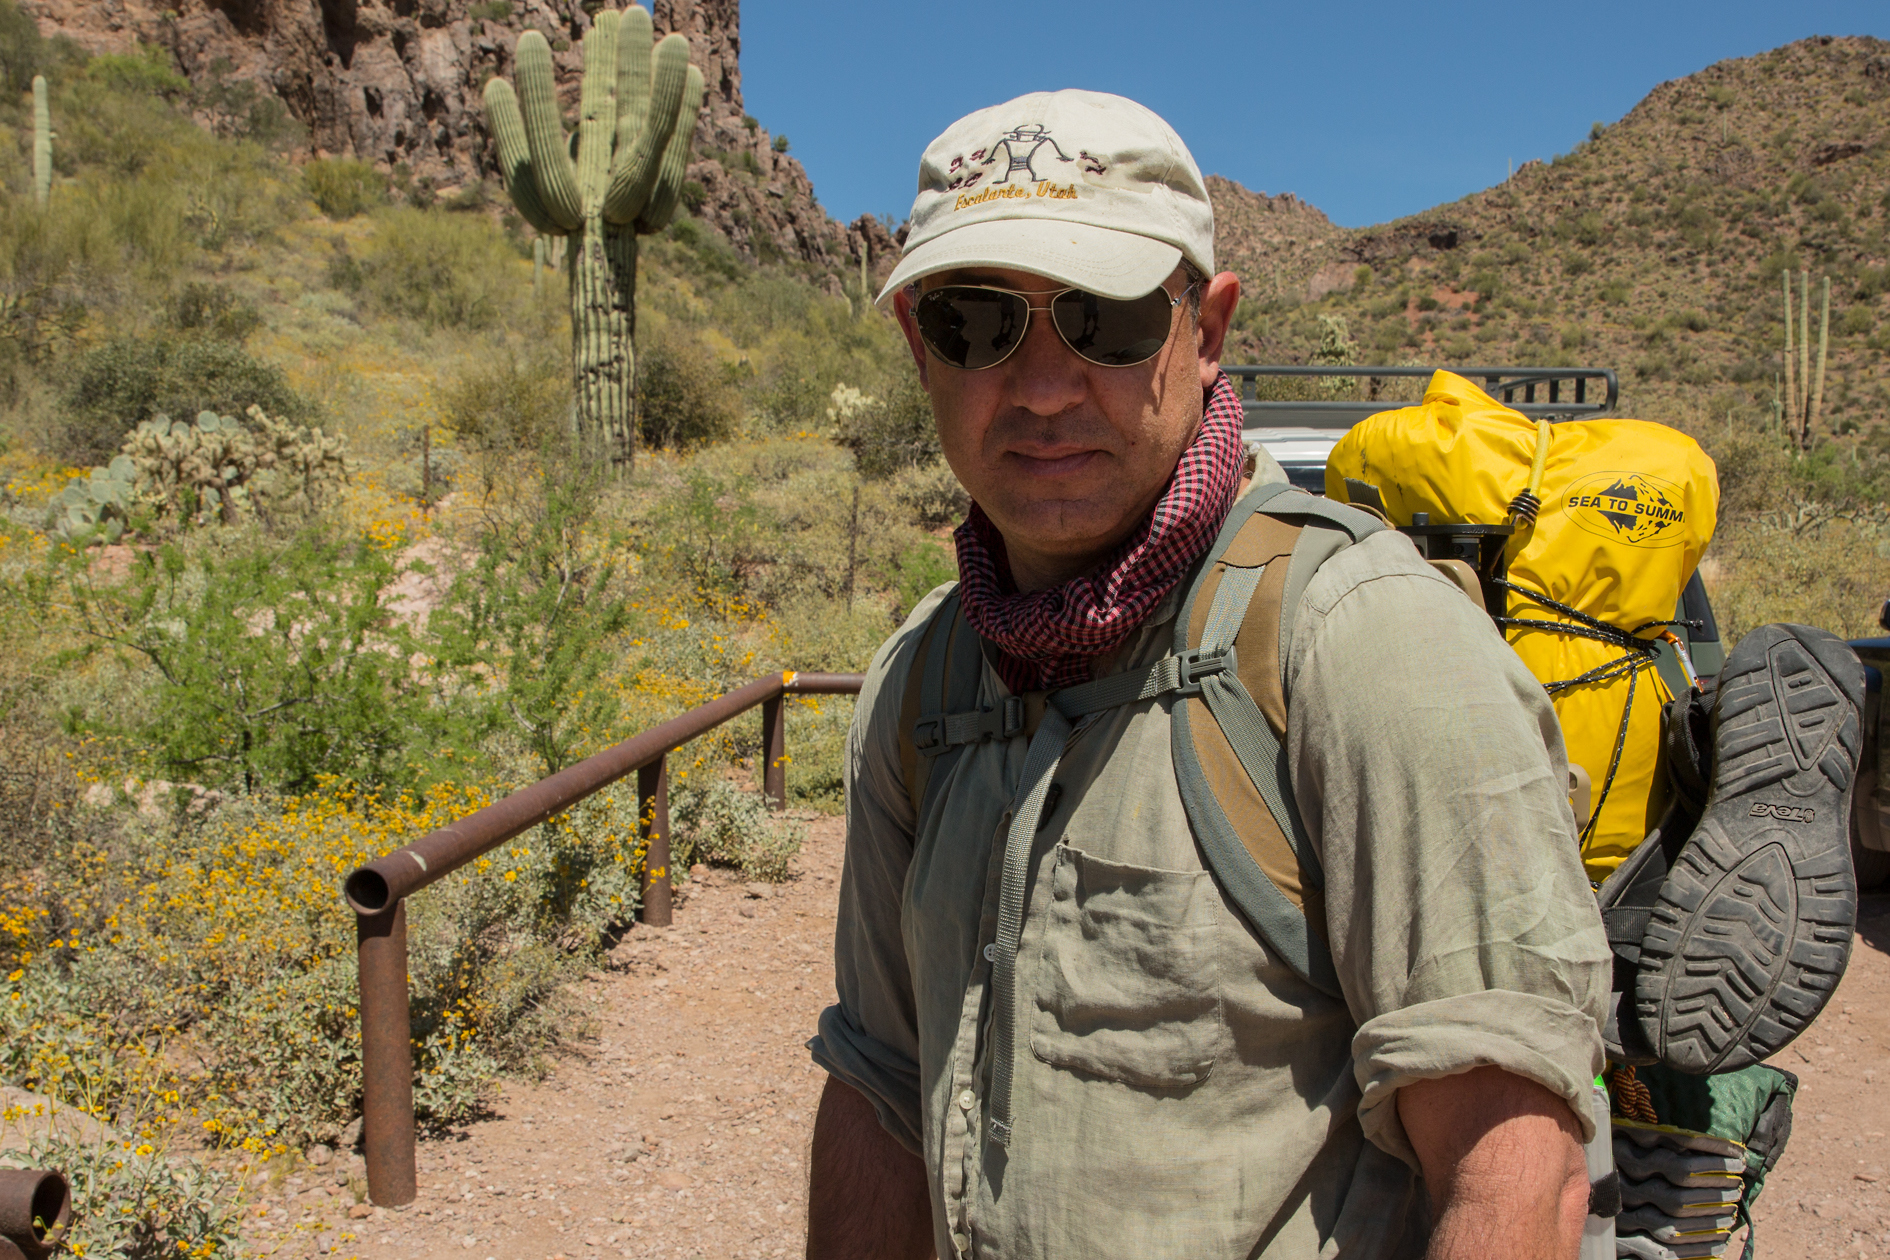 A man wearing a backpack and hiking gear pauses for a photo on a trail